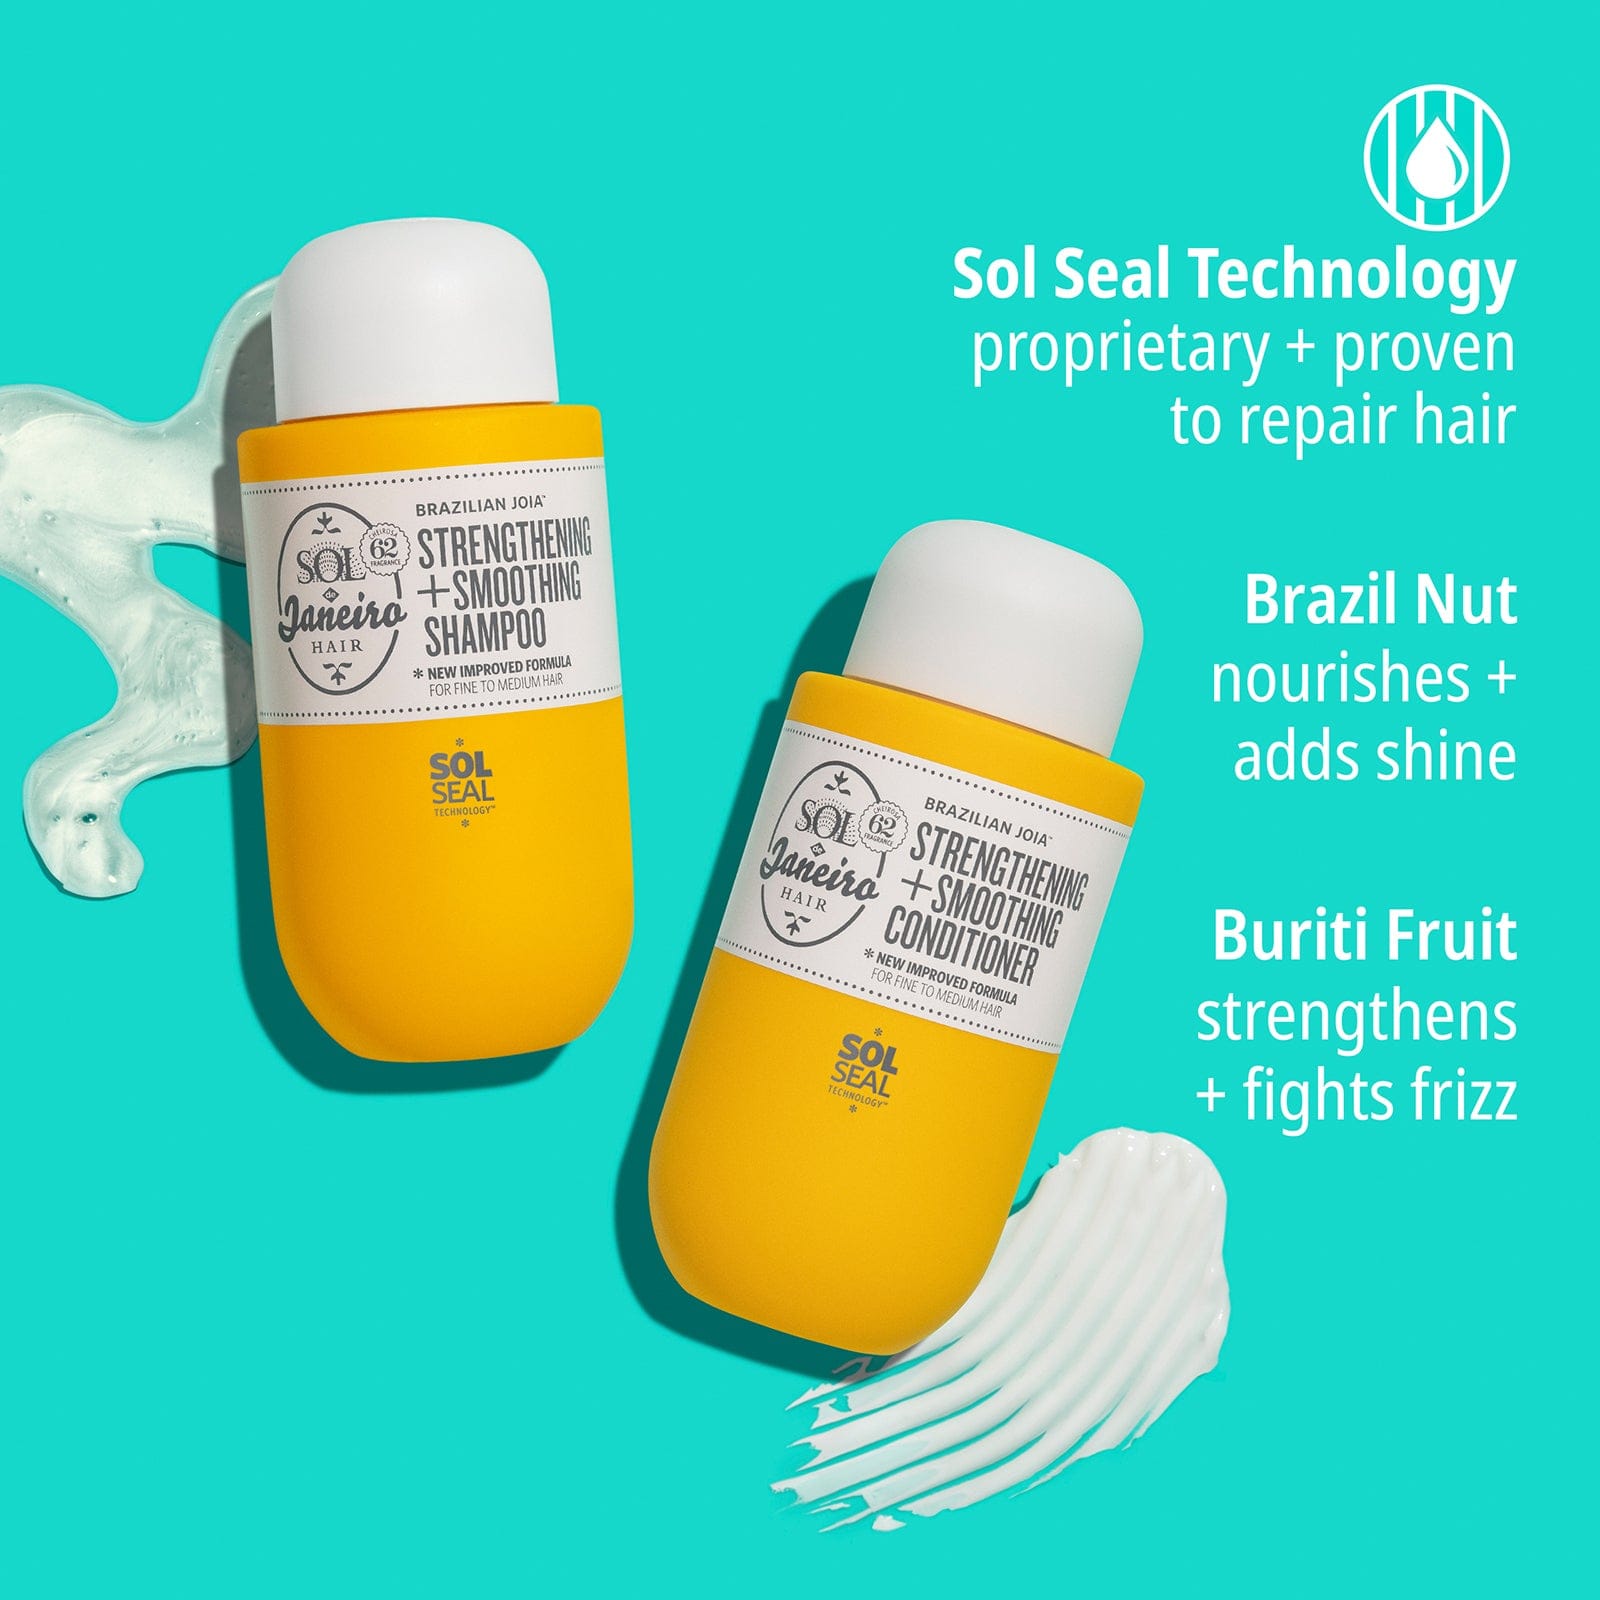 sol seal technology - proprietary and proven to repair hair | Brazil Nut - nourishes and adds shine | Buriti Fruit strengthens and fights frizz